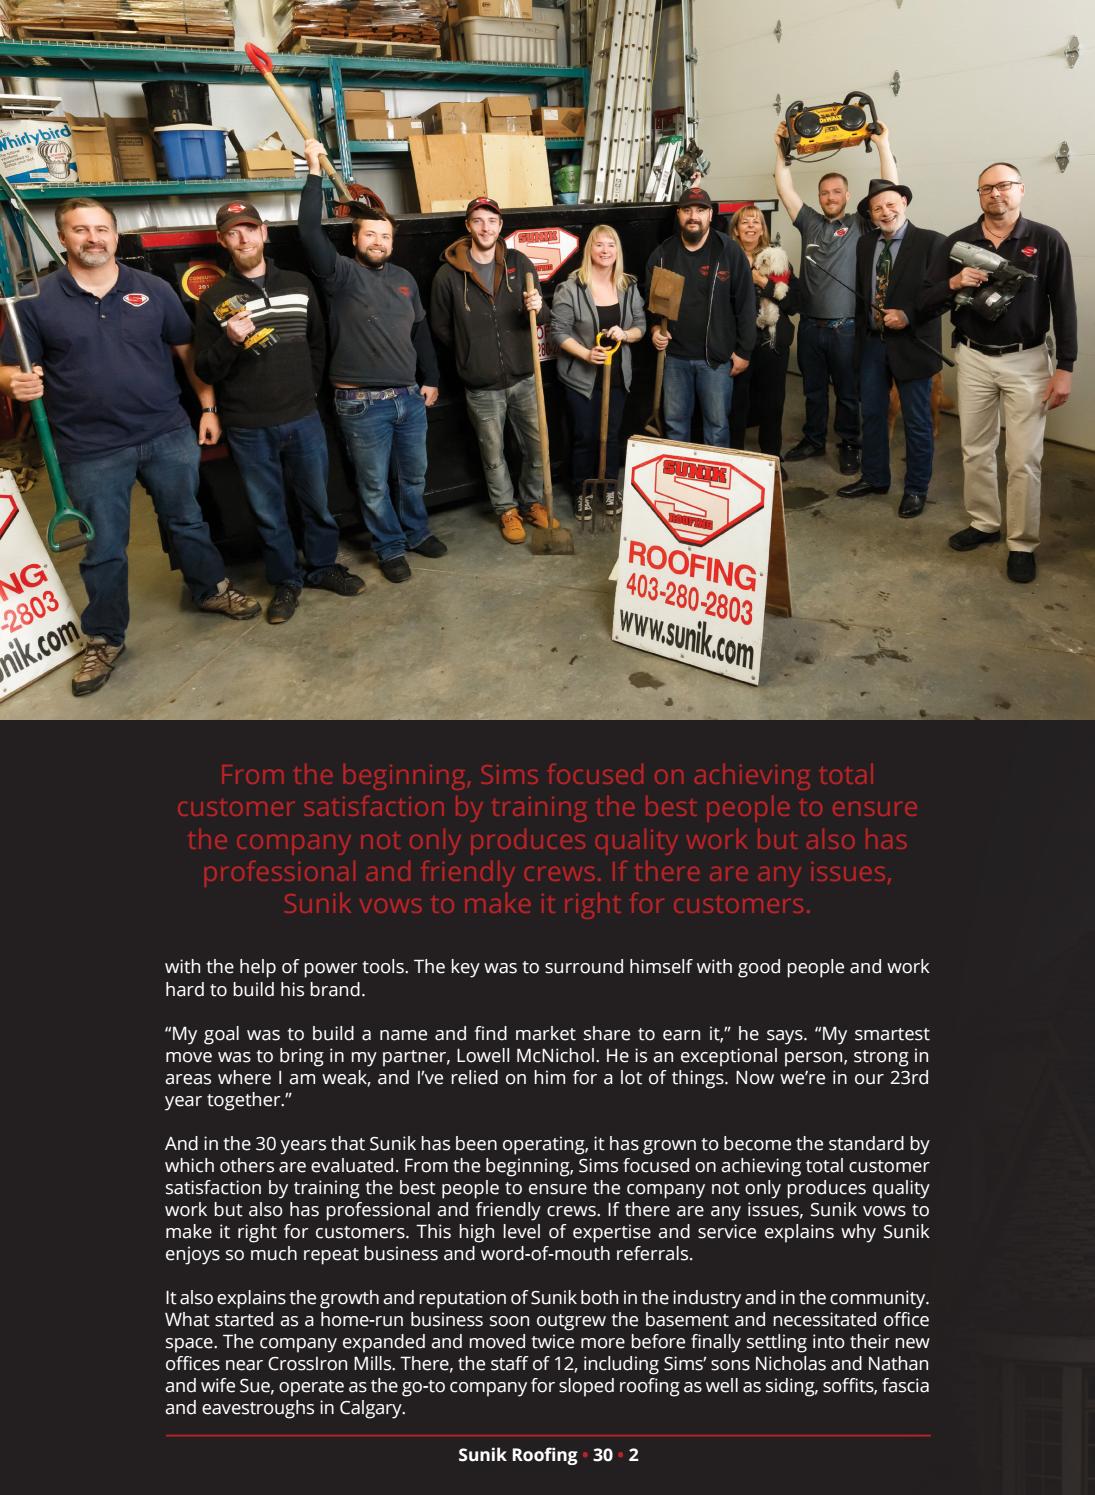 Business in Calgary Magazine - Business Profile for Sunik Roofing